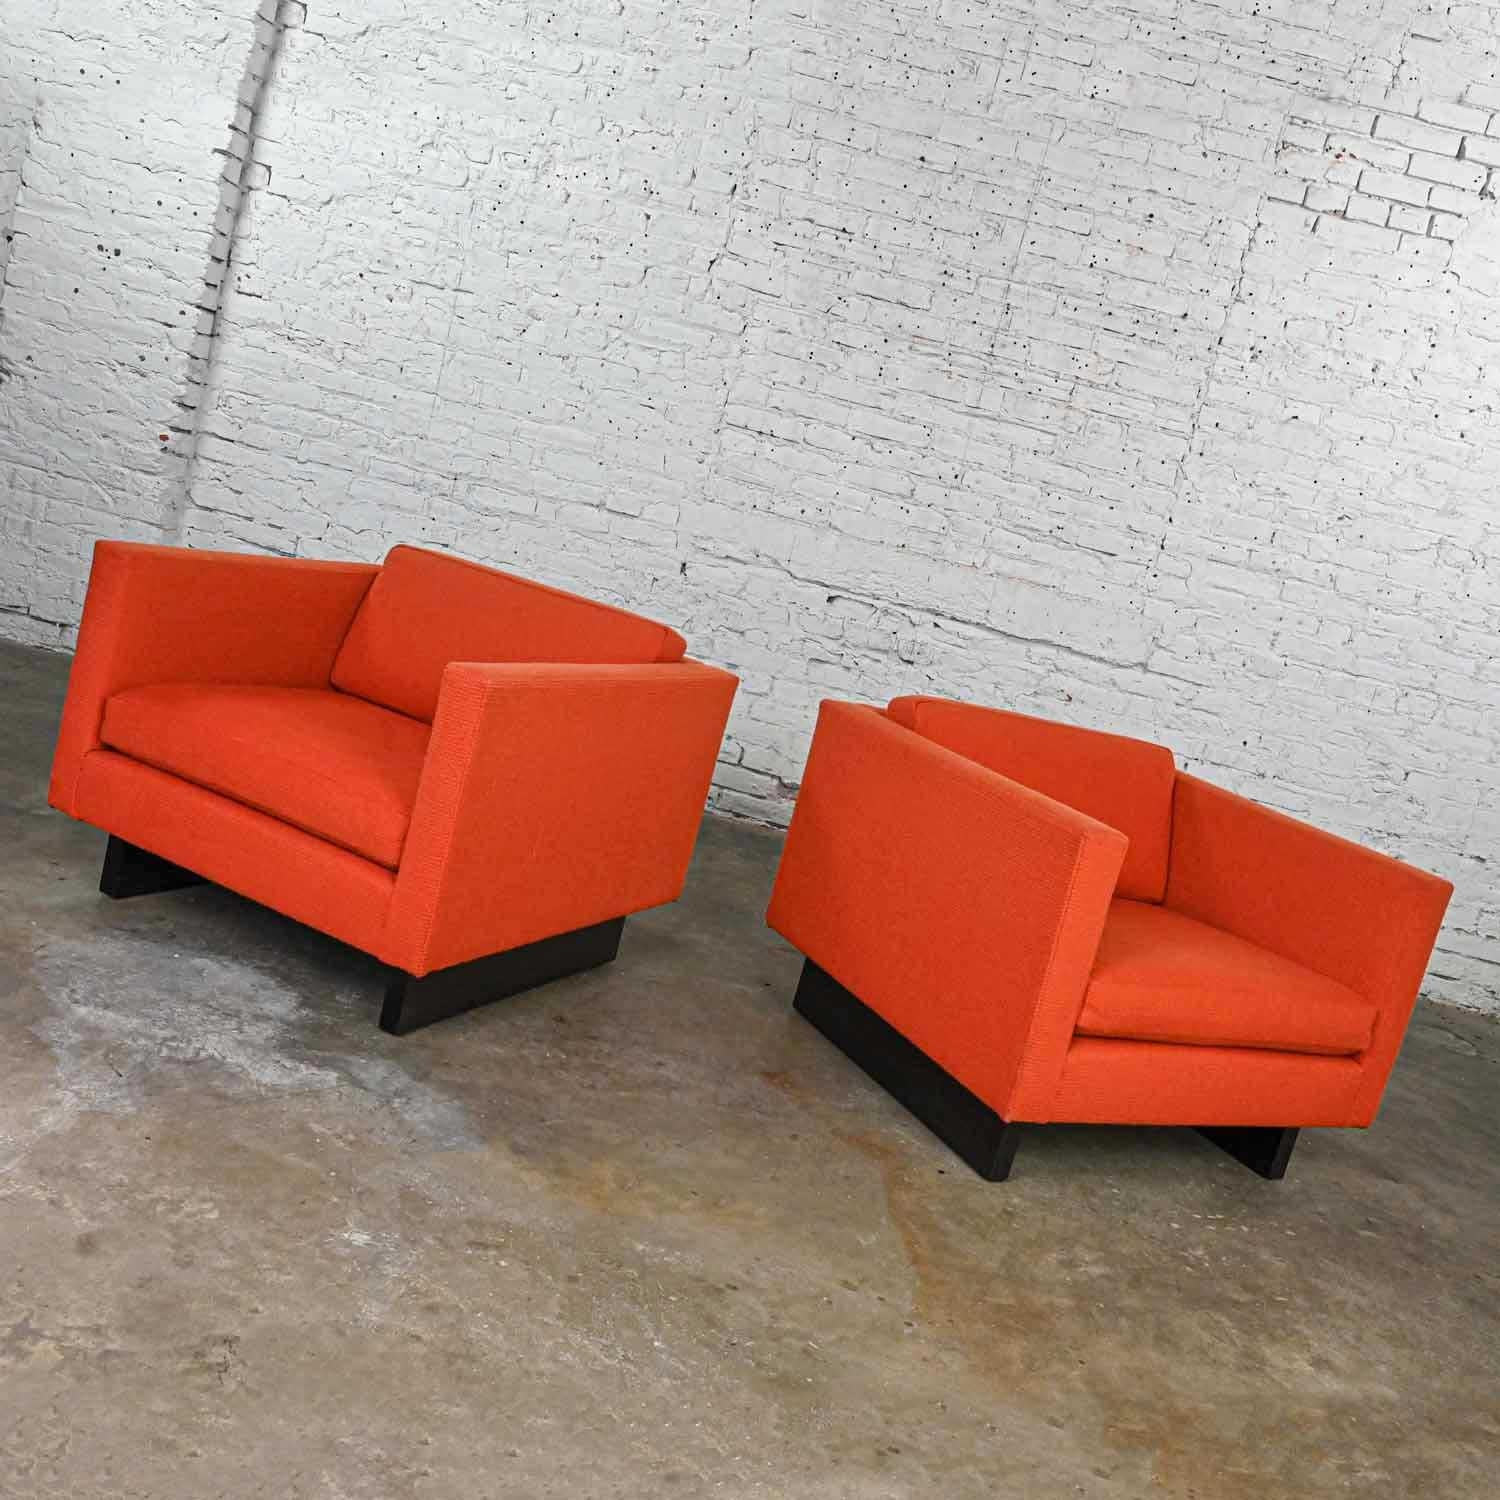 1970s Mcm to Modern Harvey Probber Club Chairs Orange 1571 Tuxedo Sleigh Bases For Sale 4